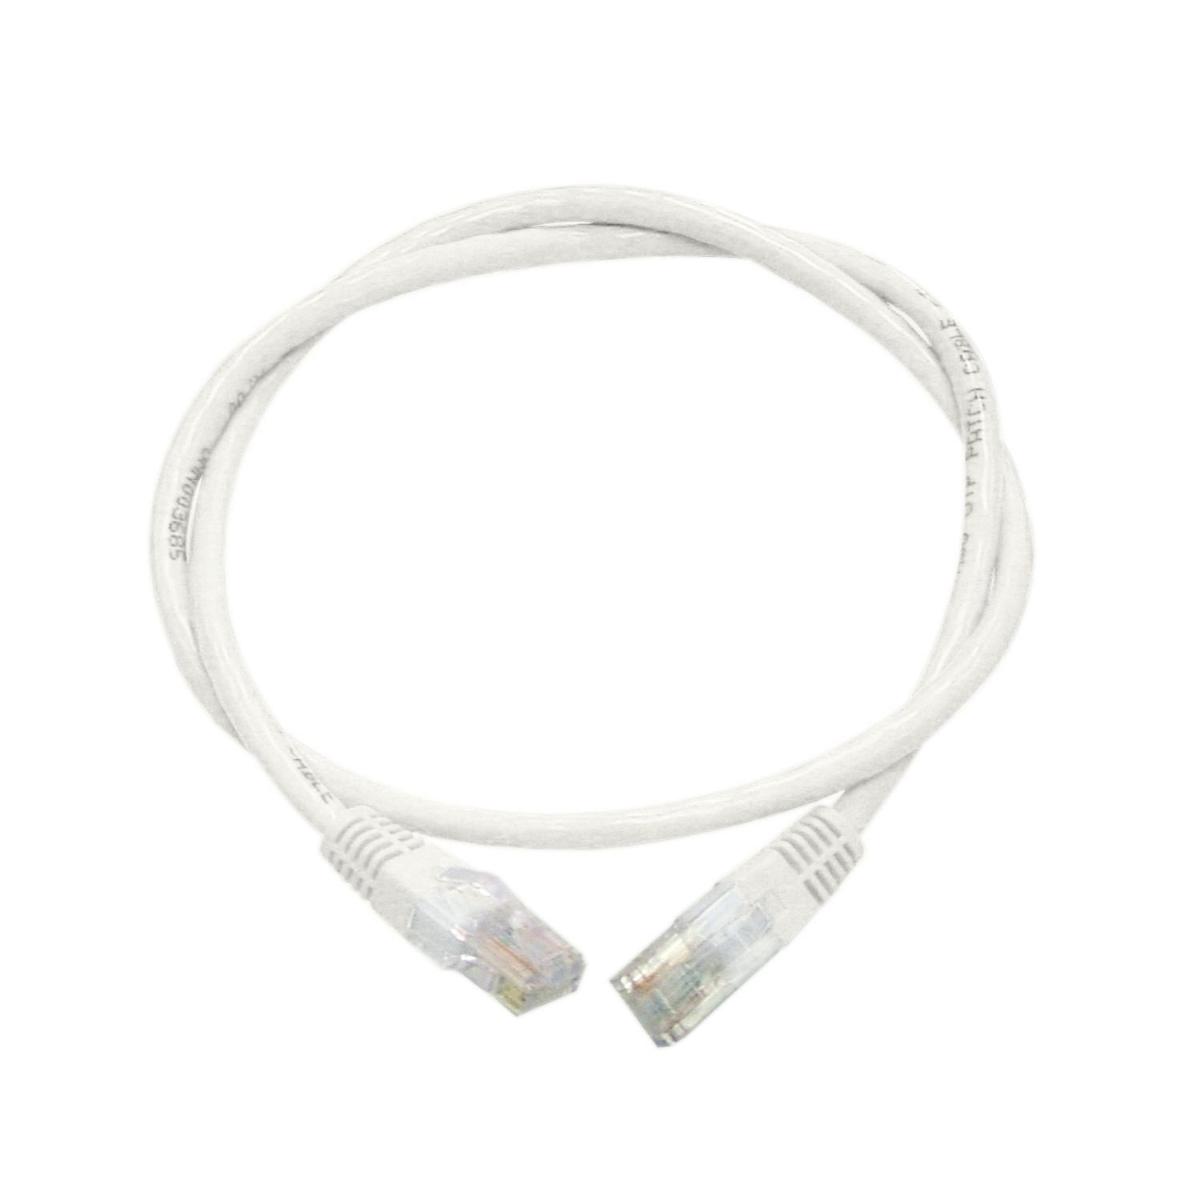 PATCHLEAD CAT5E UTP 1.5MTR WHITE